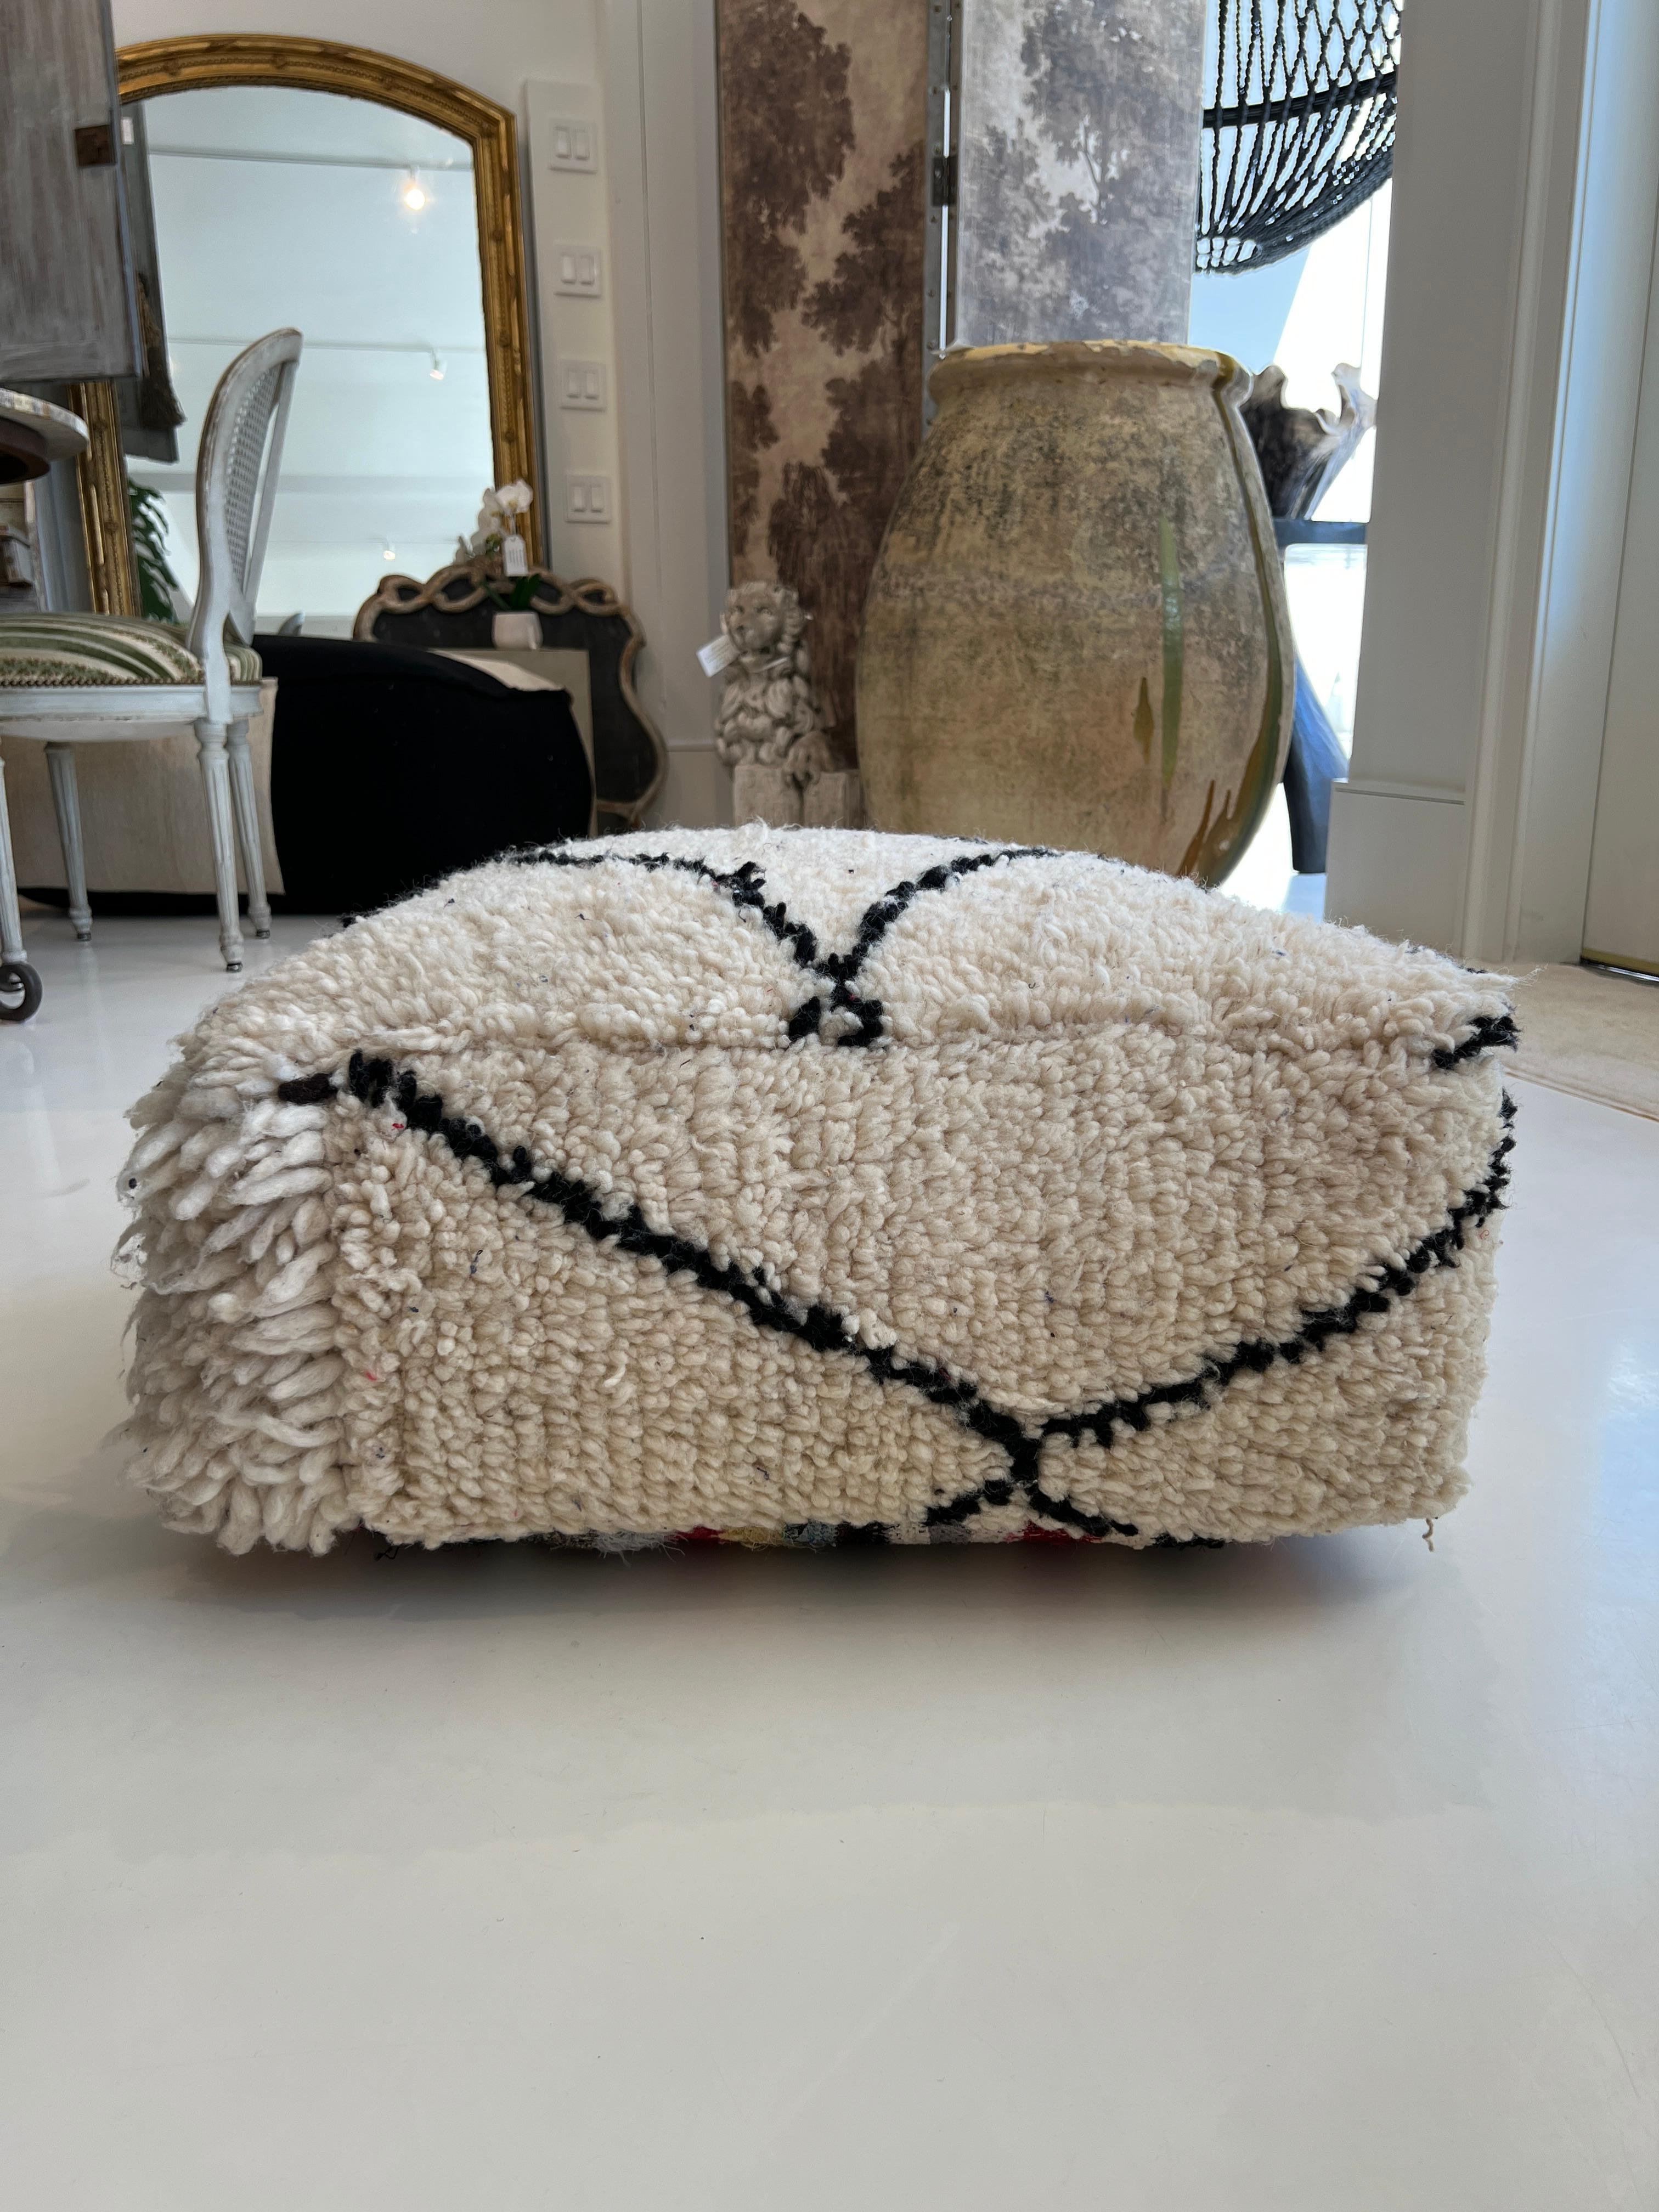 Large ottoman or pouf in a rustic woven wool.